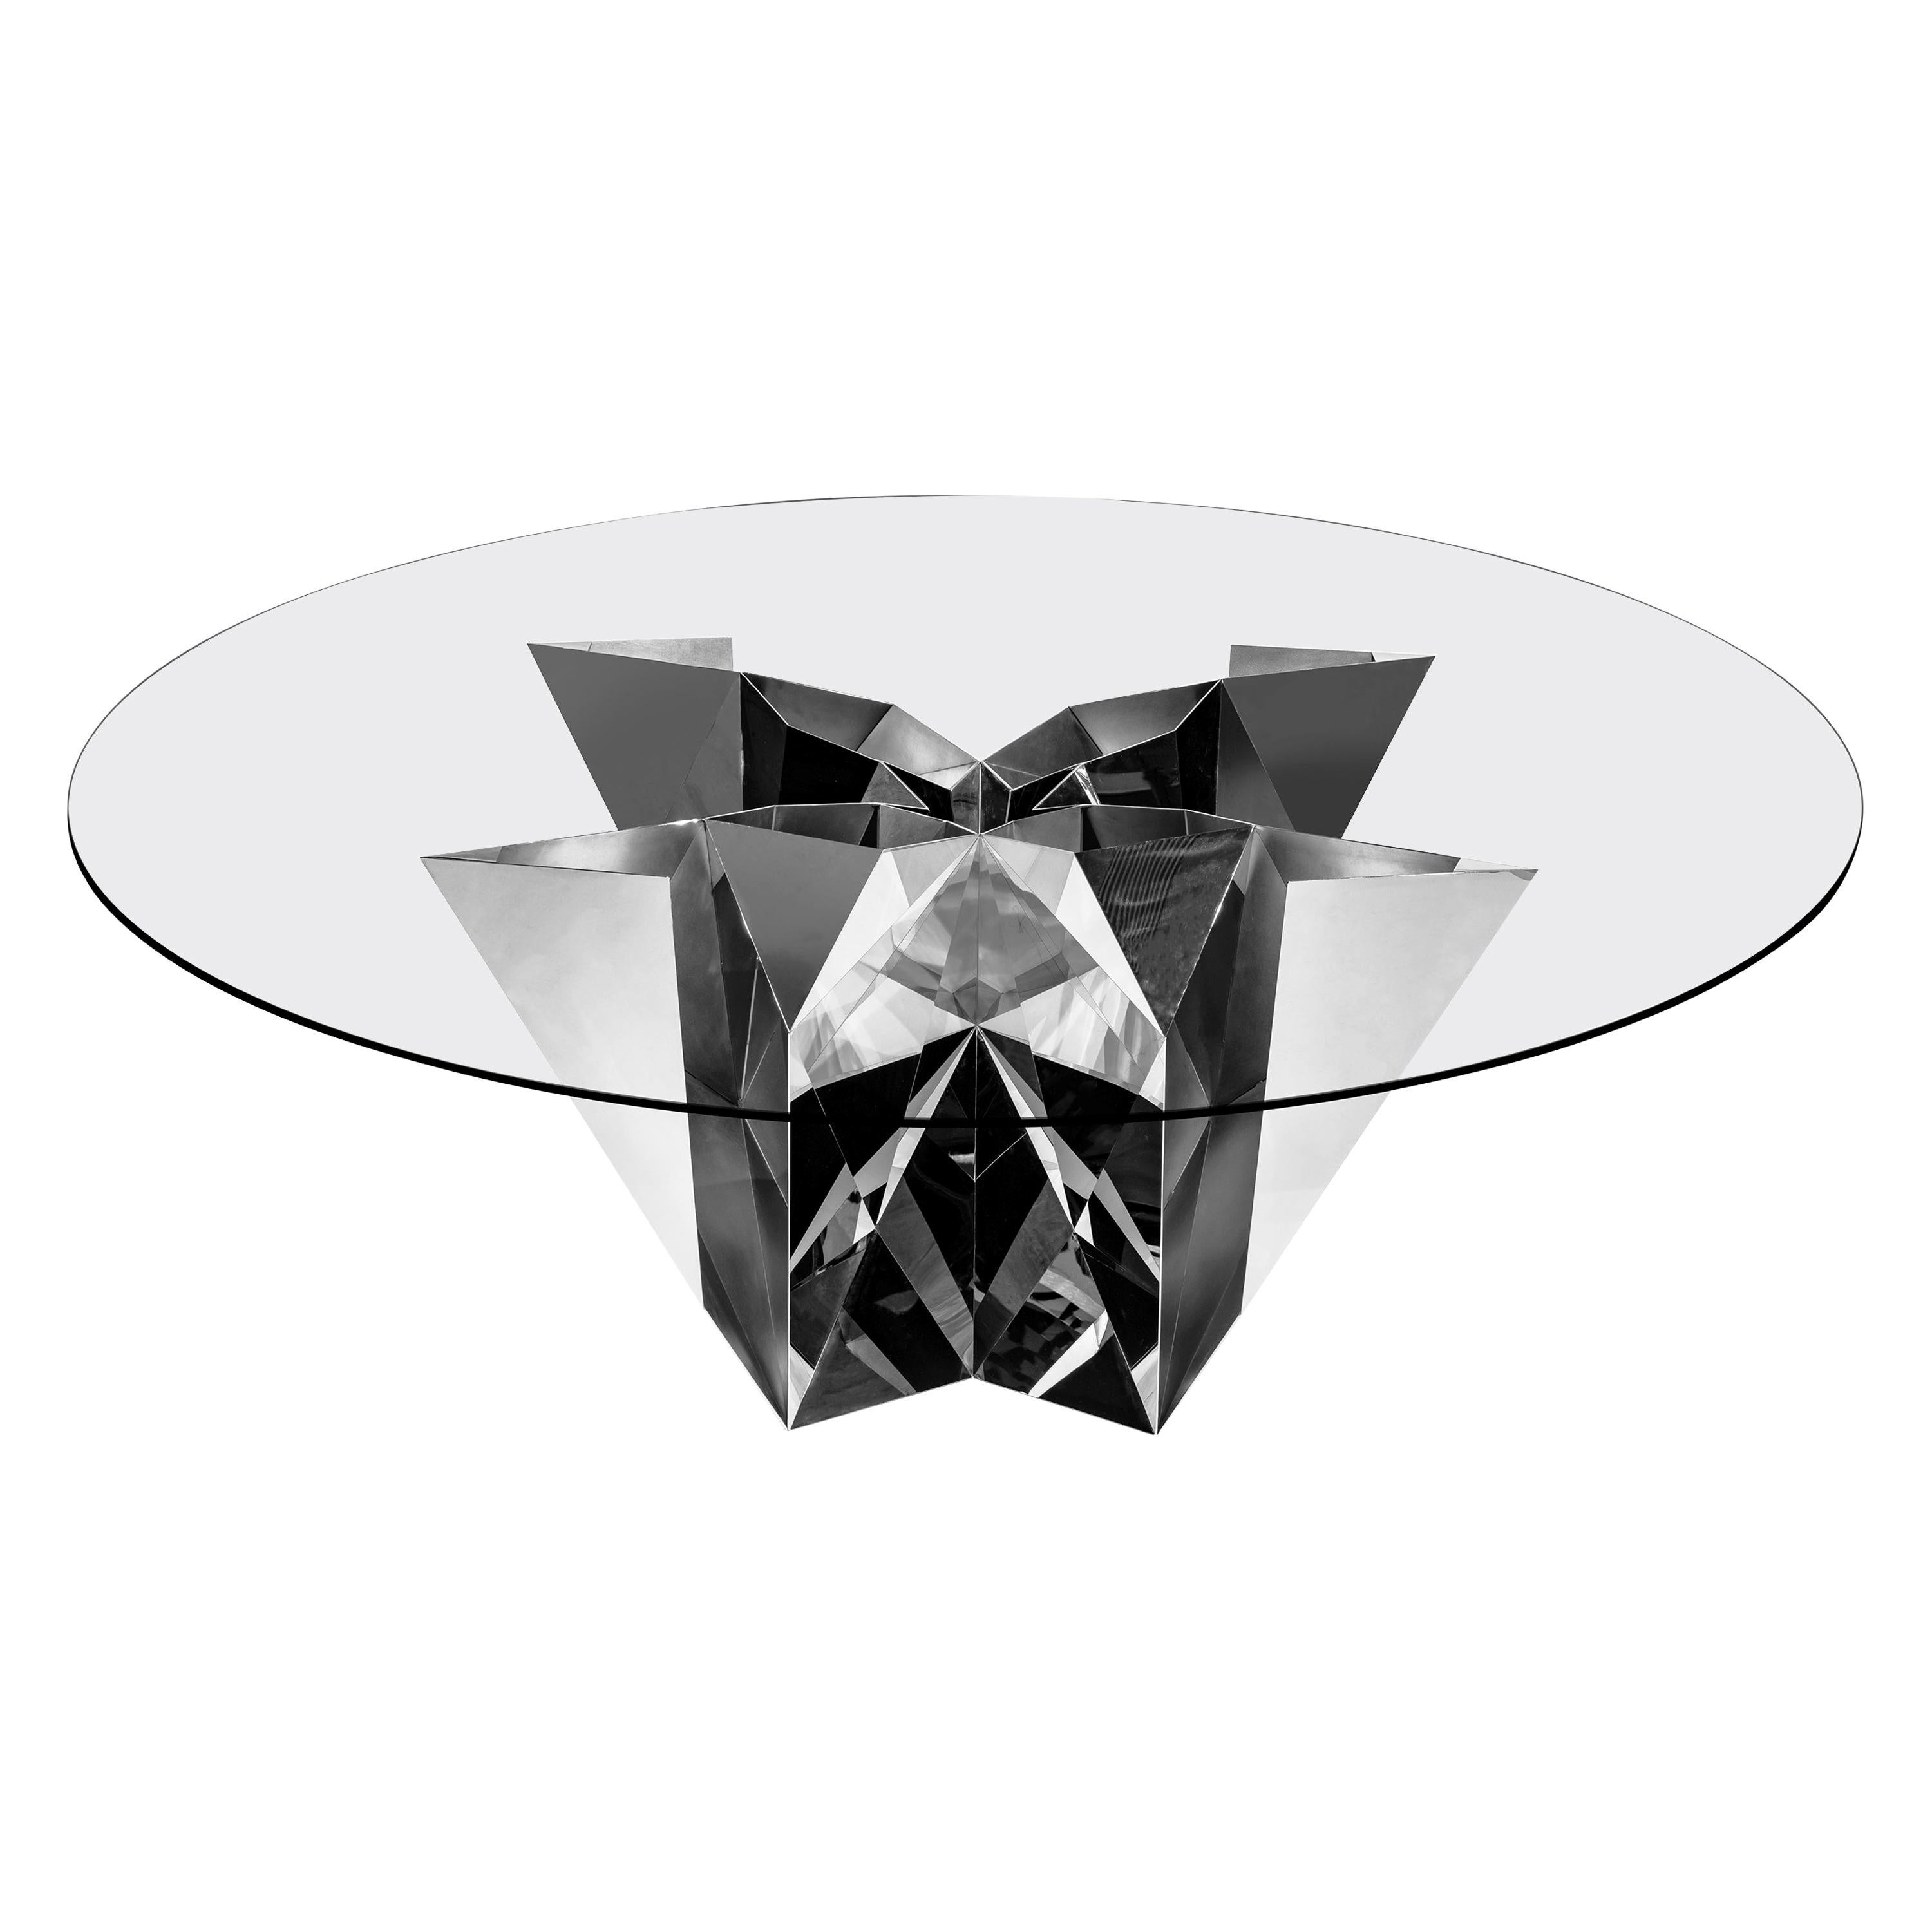 Object #MT-F2-S Mirror Polished Stainless Steel Table by Zhoujie Zhang For Sale